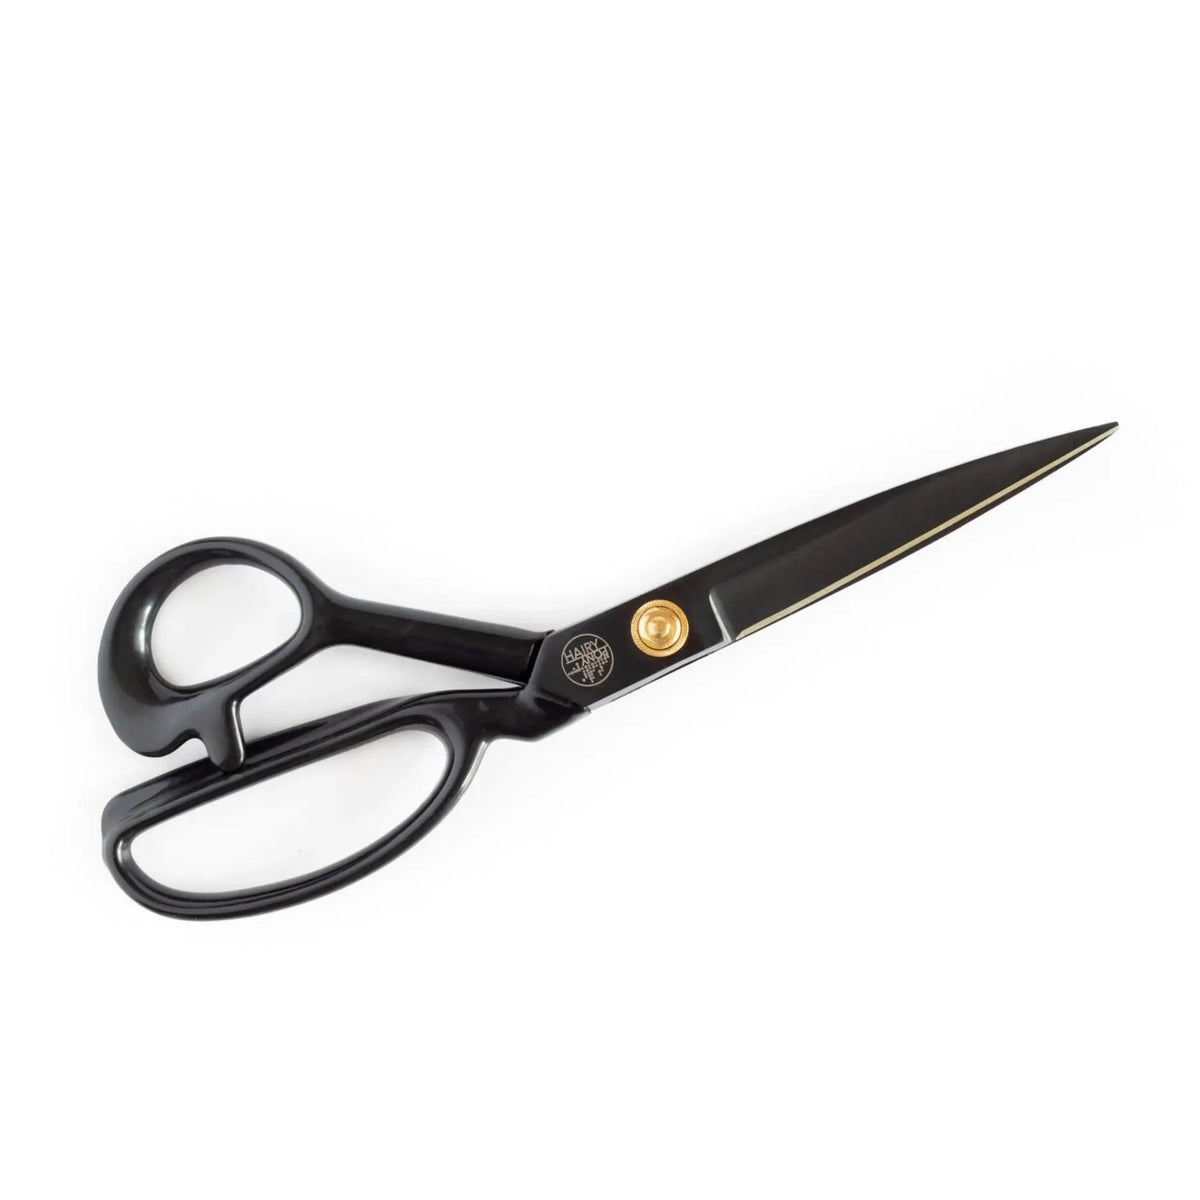 HAIRY PONY STABLE SUPPLIES Hairy Pony Tail Trimming Scissors